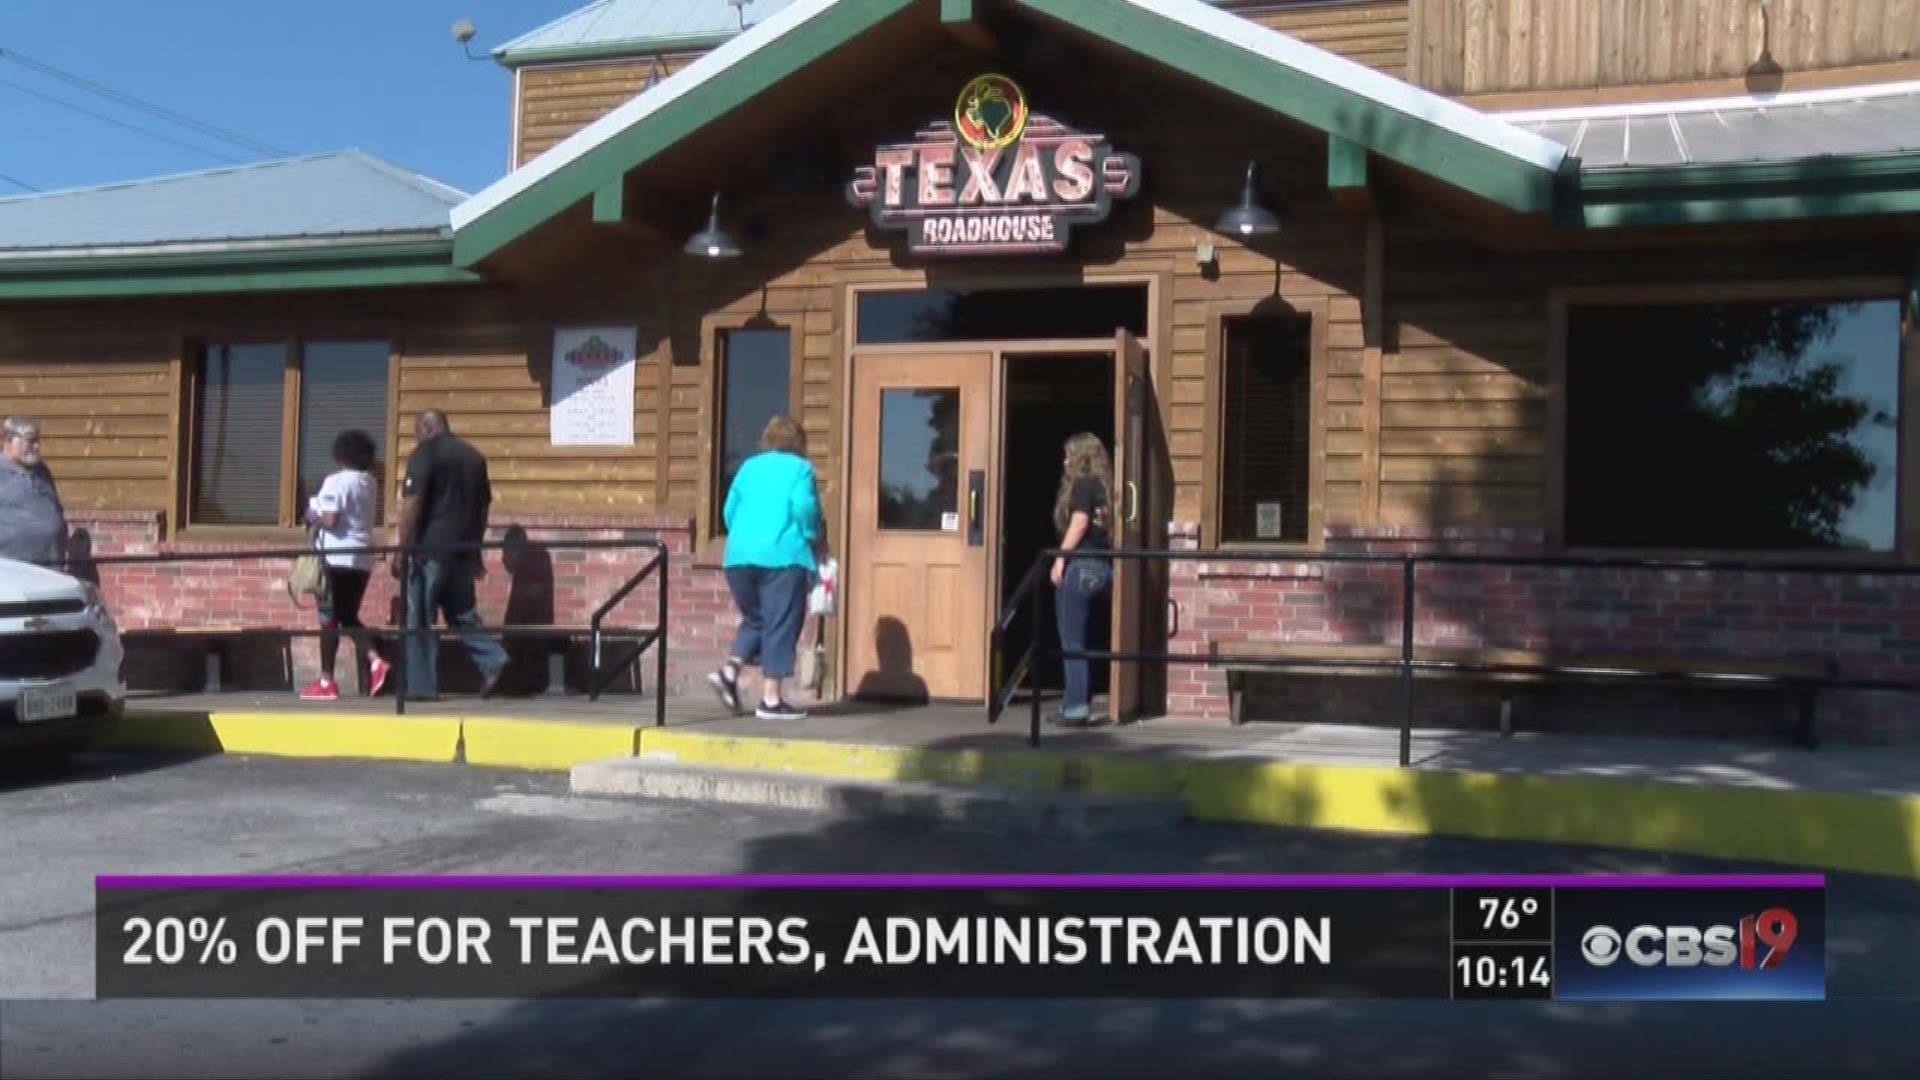 Texas Roadhouse is offering a 20 percent discount to all teachers throughout the month of September.